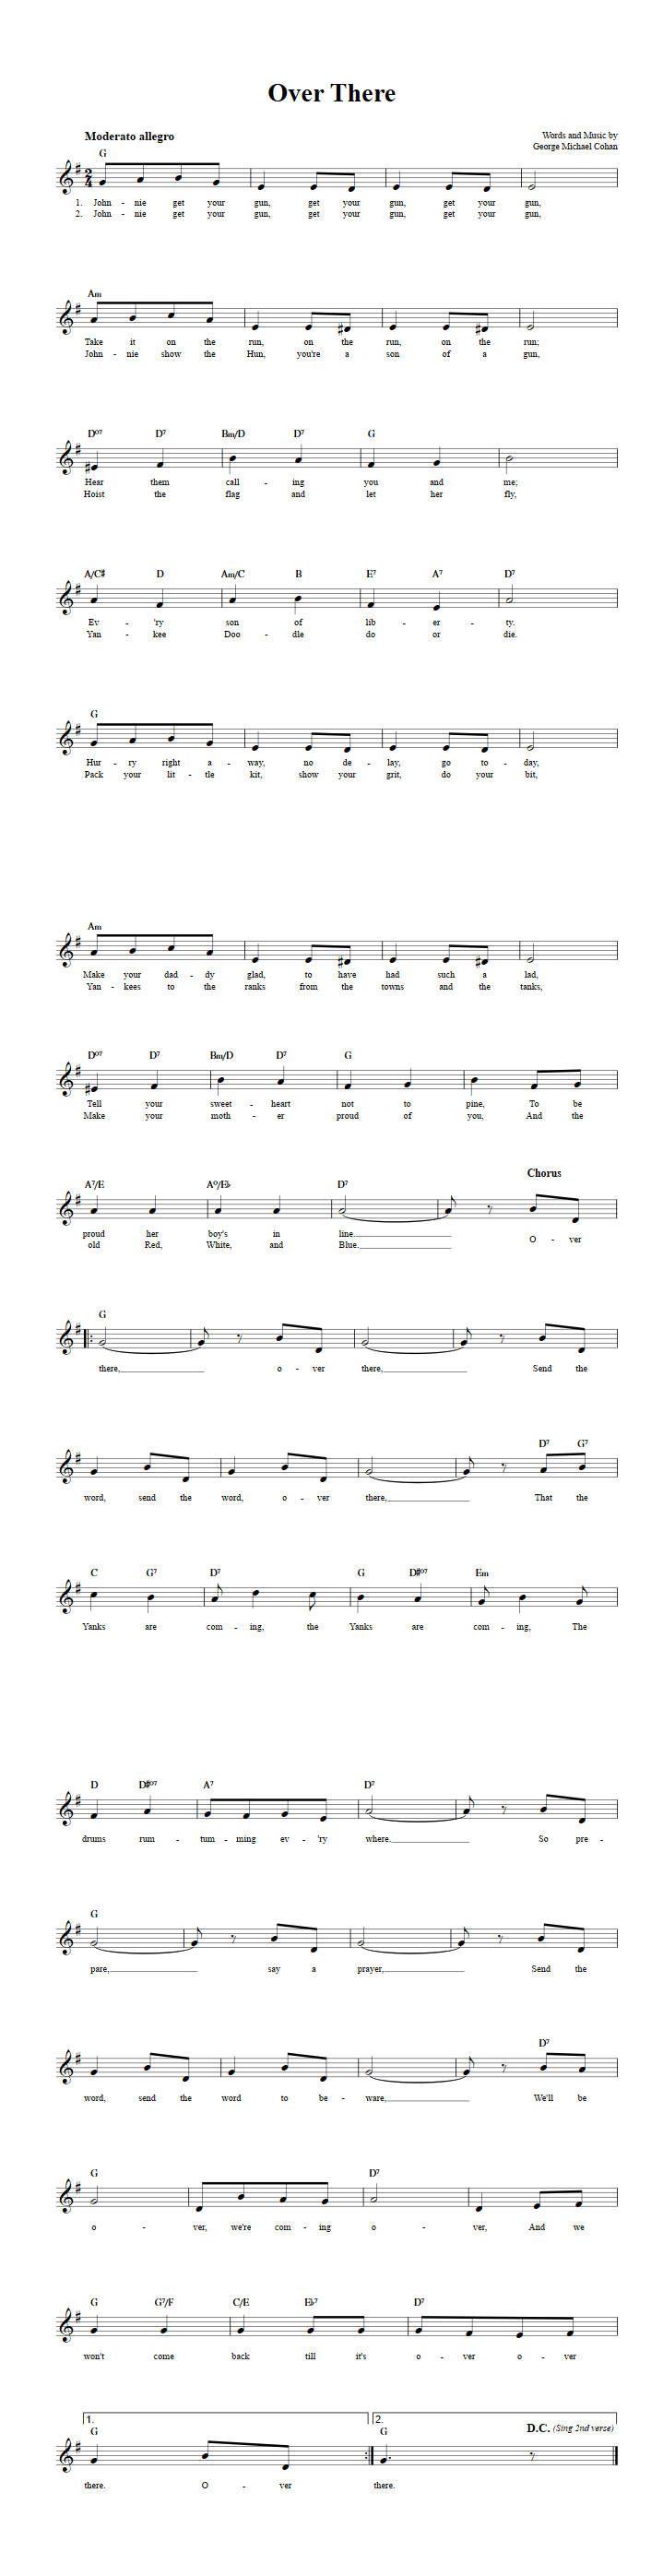 Over There Treble Clef Sheet Music for E-Flat Instruments